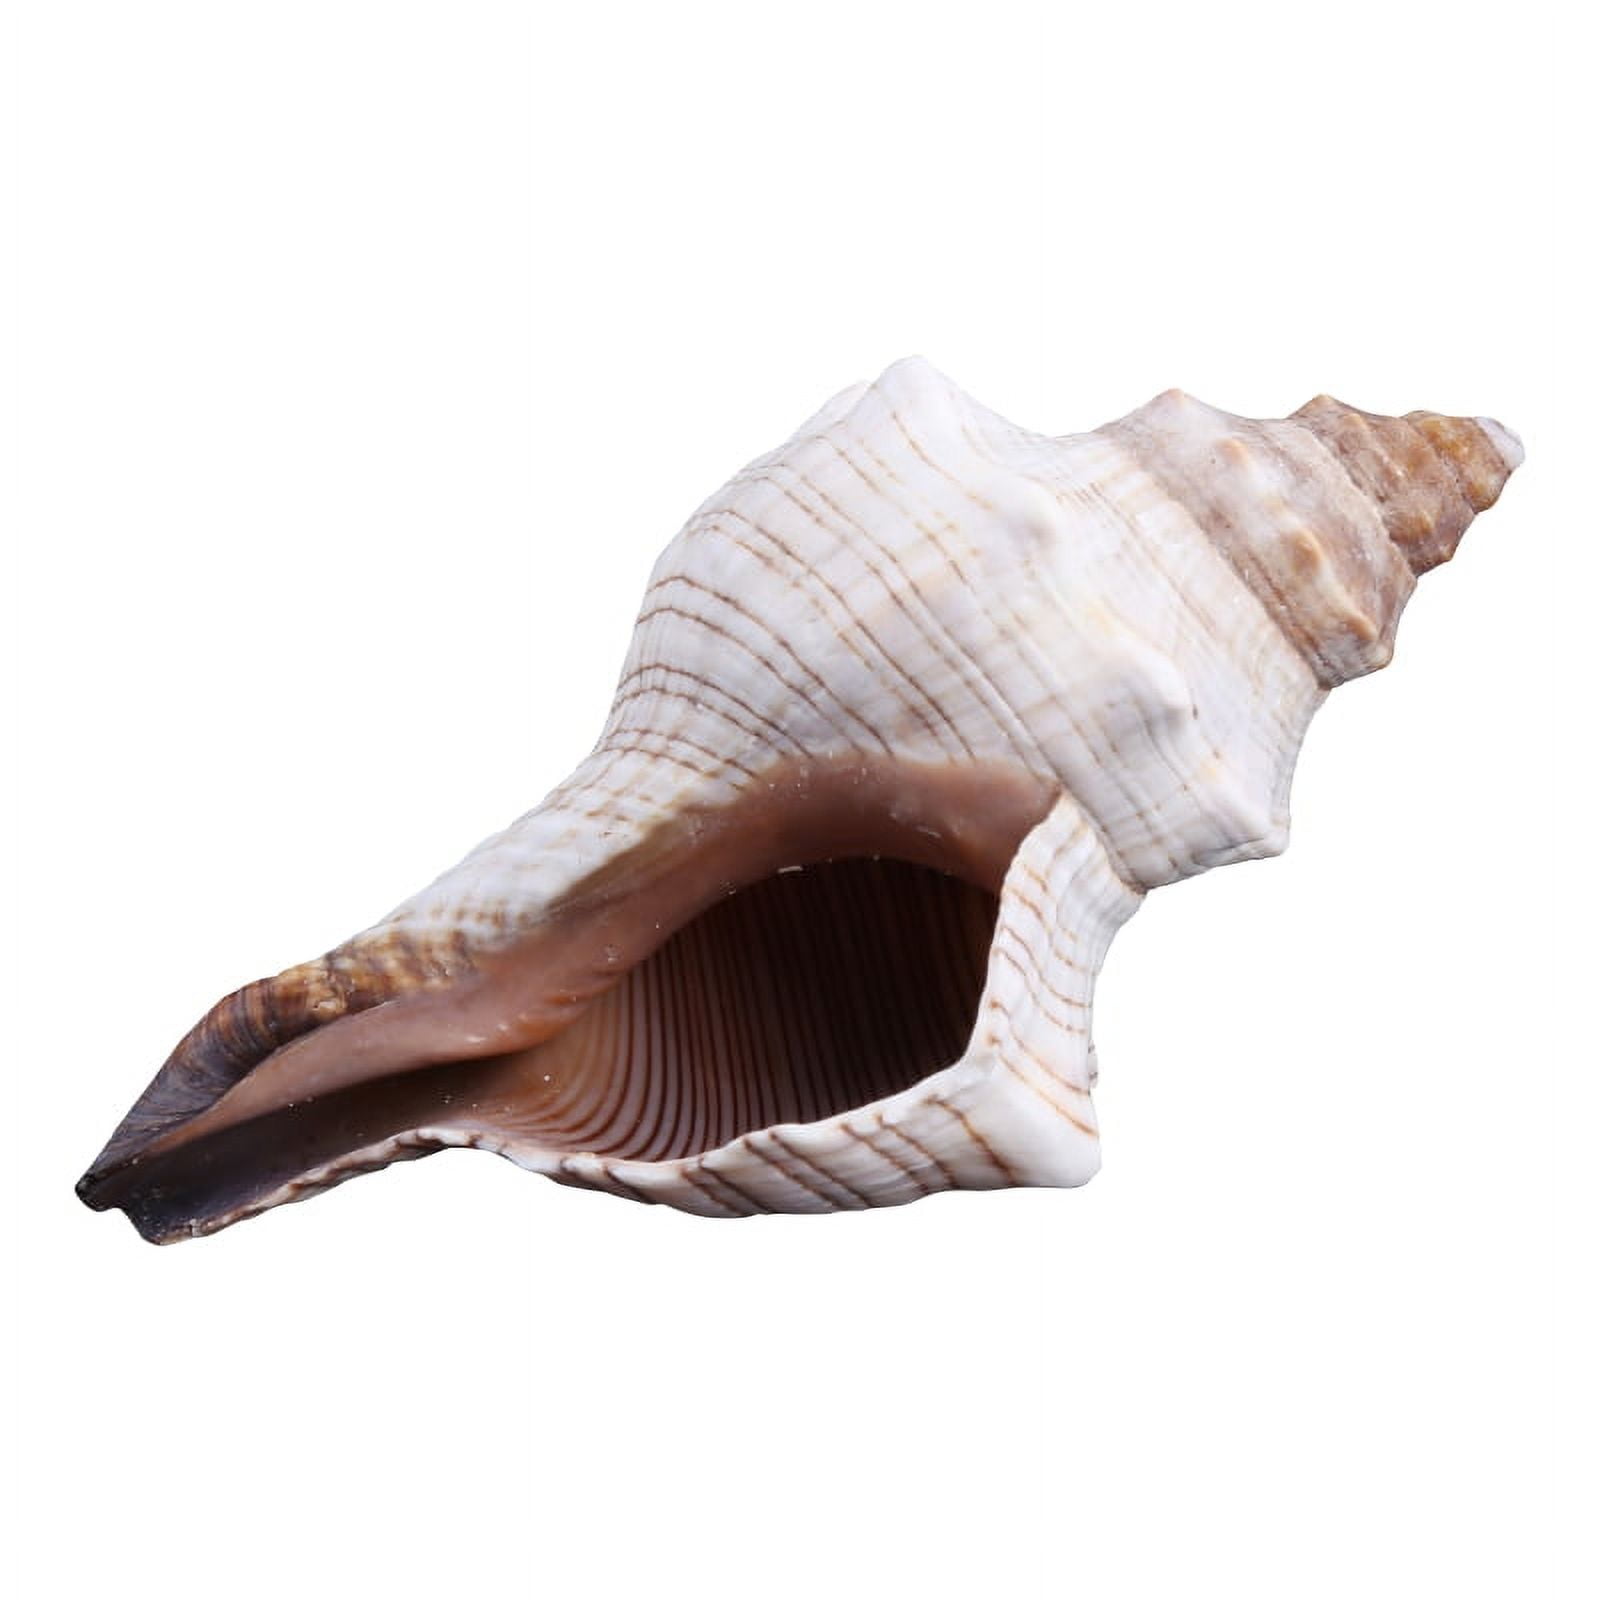 Jangostor Large Natural Sea Shells, Huge Ocean Conch 7-8 inches Jumbo  Seashells Perfect for Wedding Decor Beach Theme Party, Home Decorations,DIY